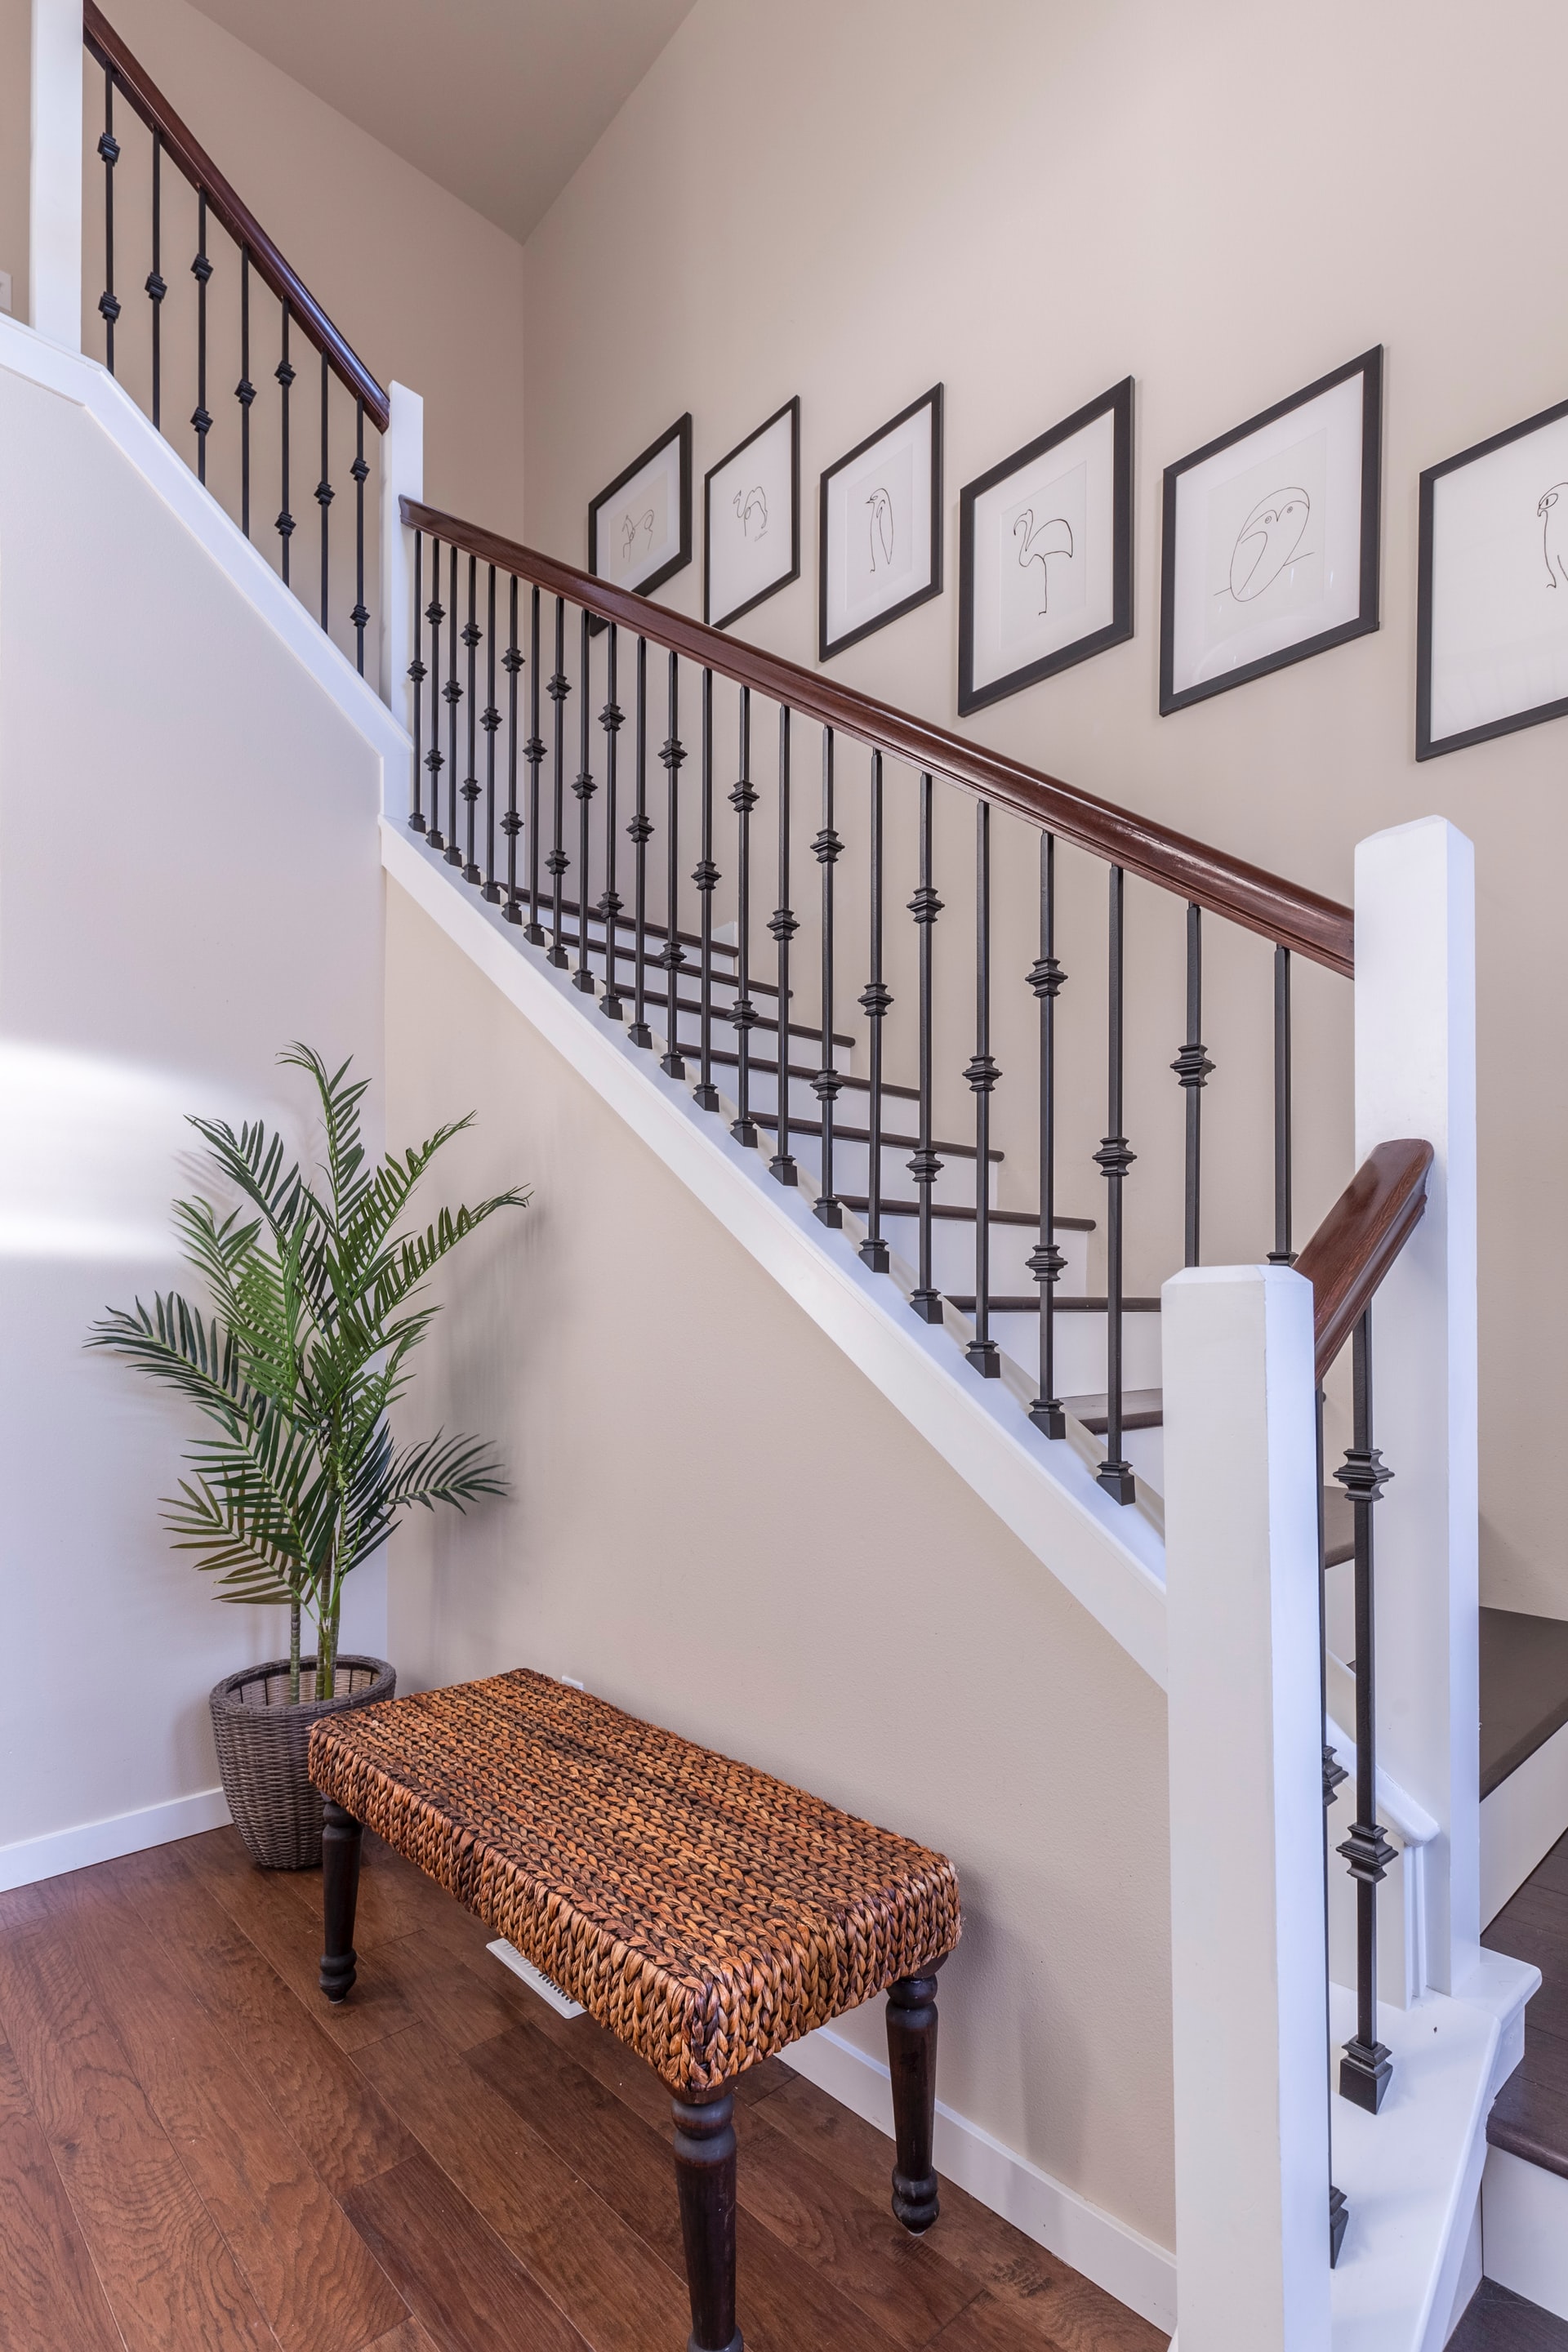 shot of the staircase in a home